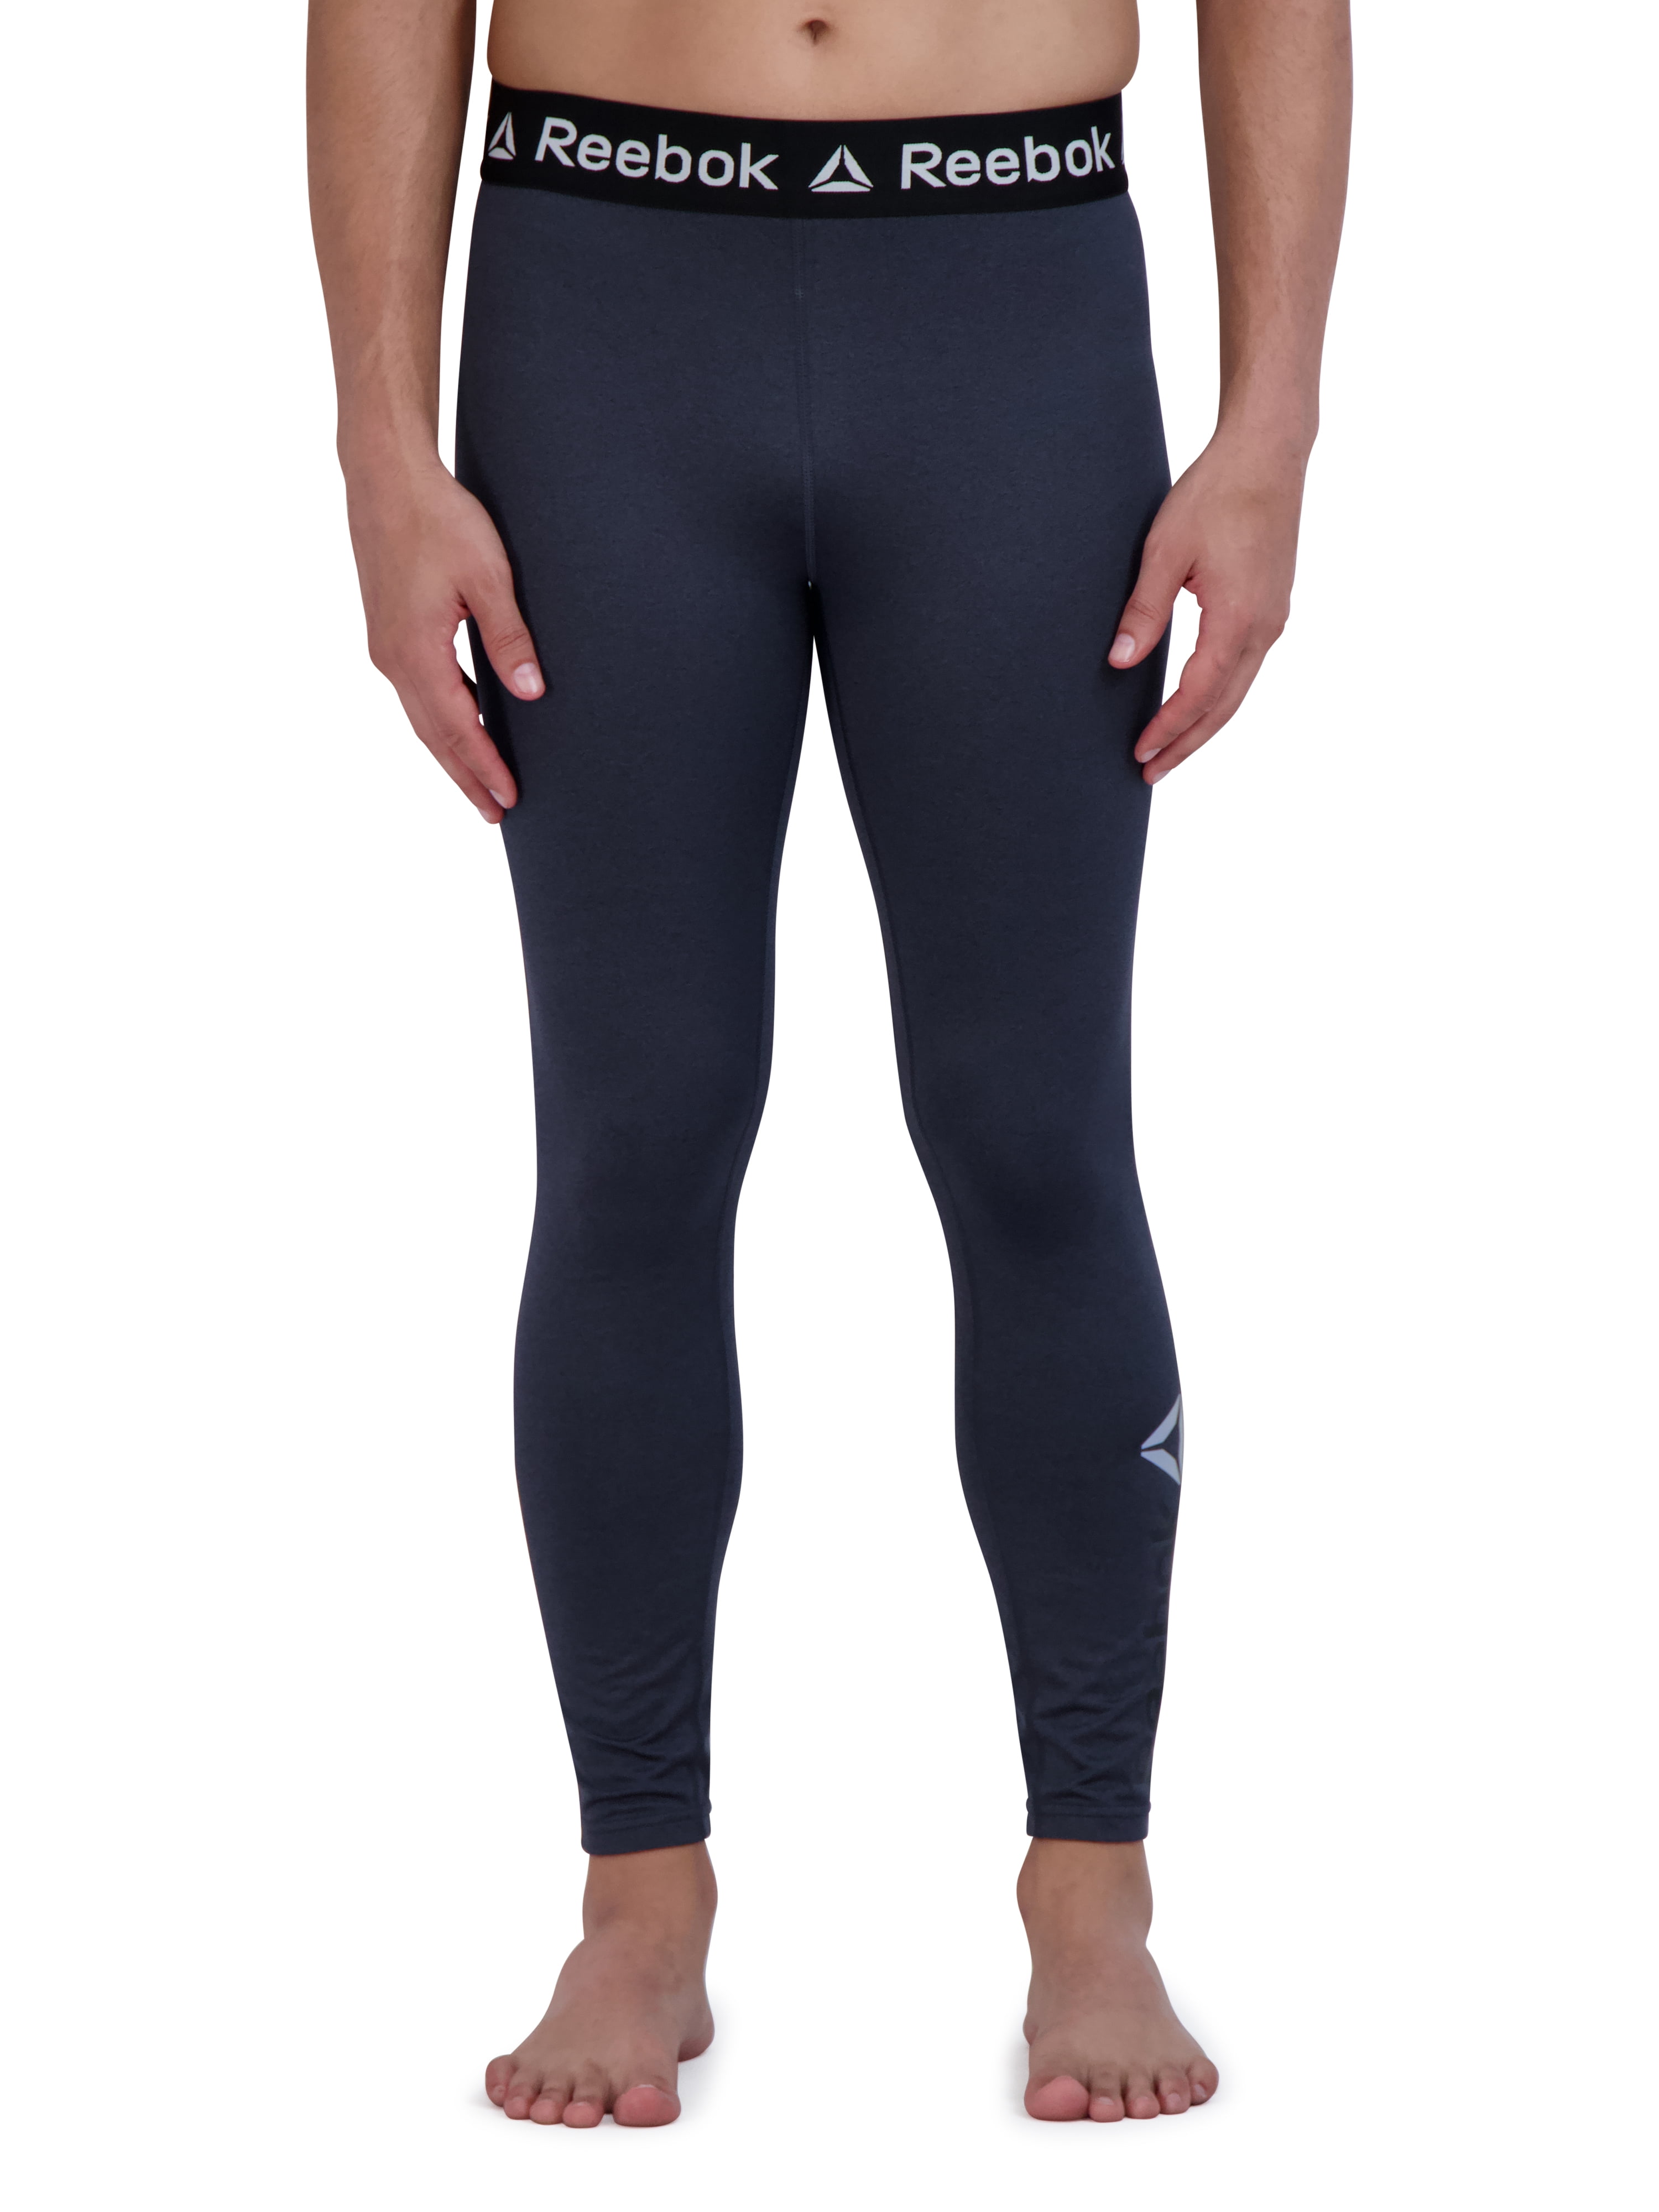 Under Armour Tactical Coldgear Infrared Base Leggings – Harriman Army-Navy